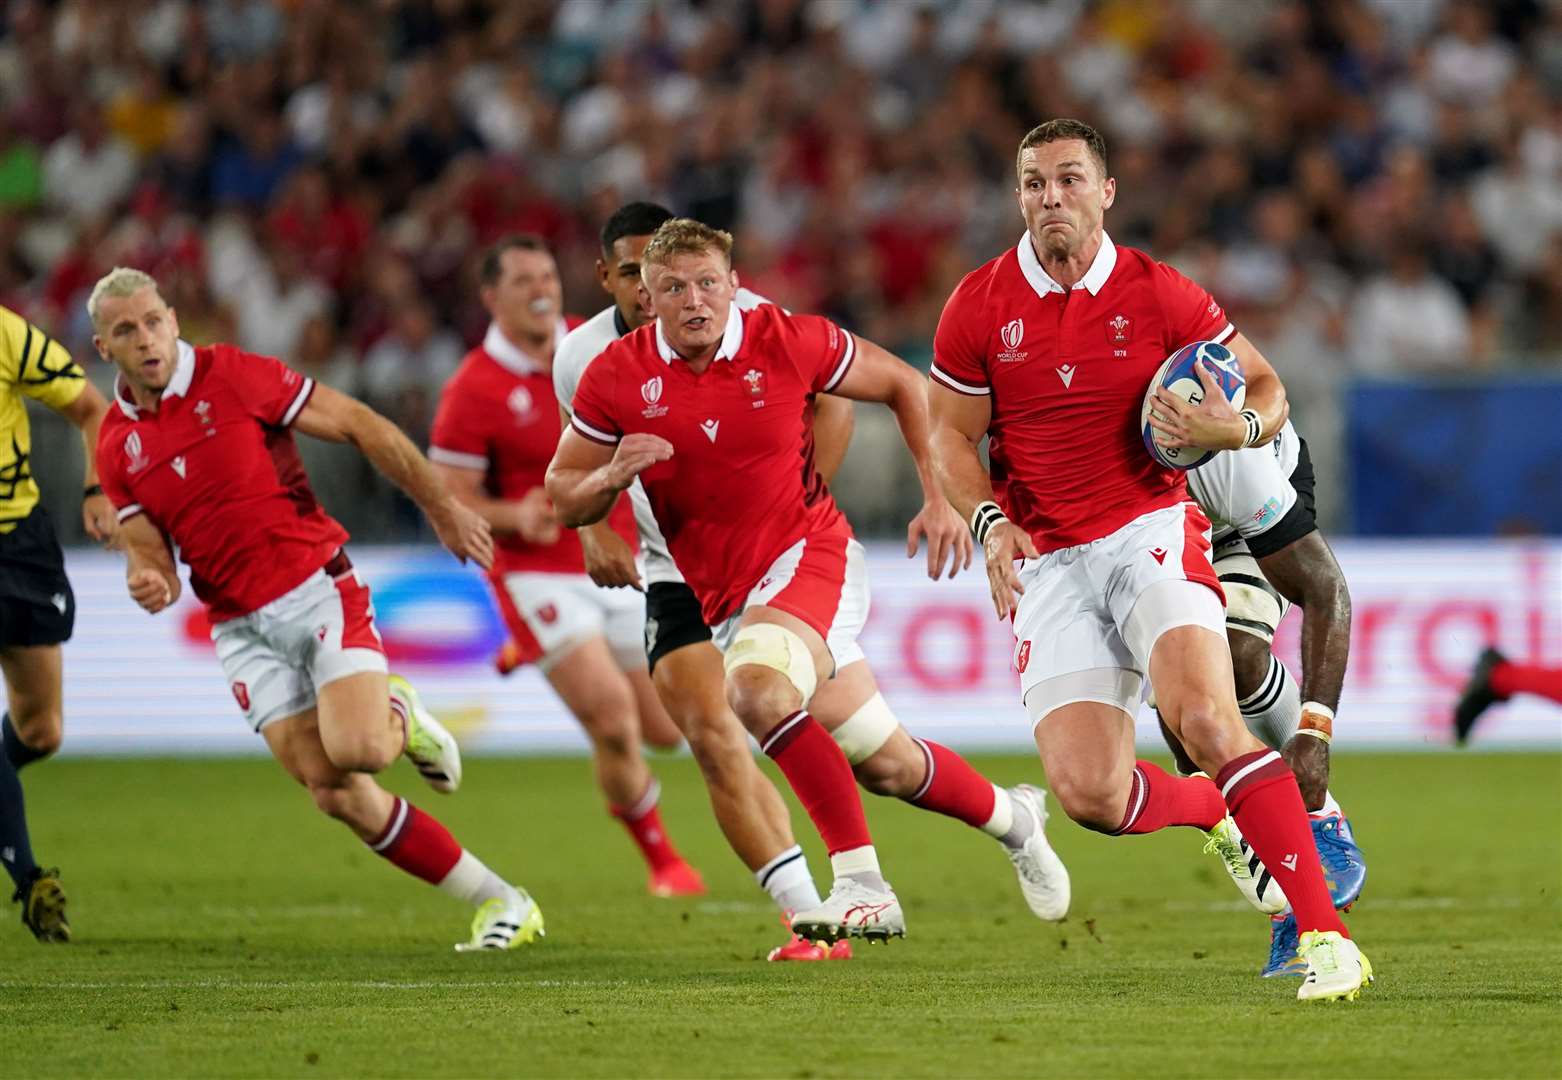 Wales break away during the Rugby World Cup match against Fiji (David Davies/PA)